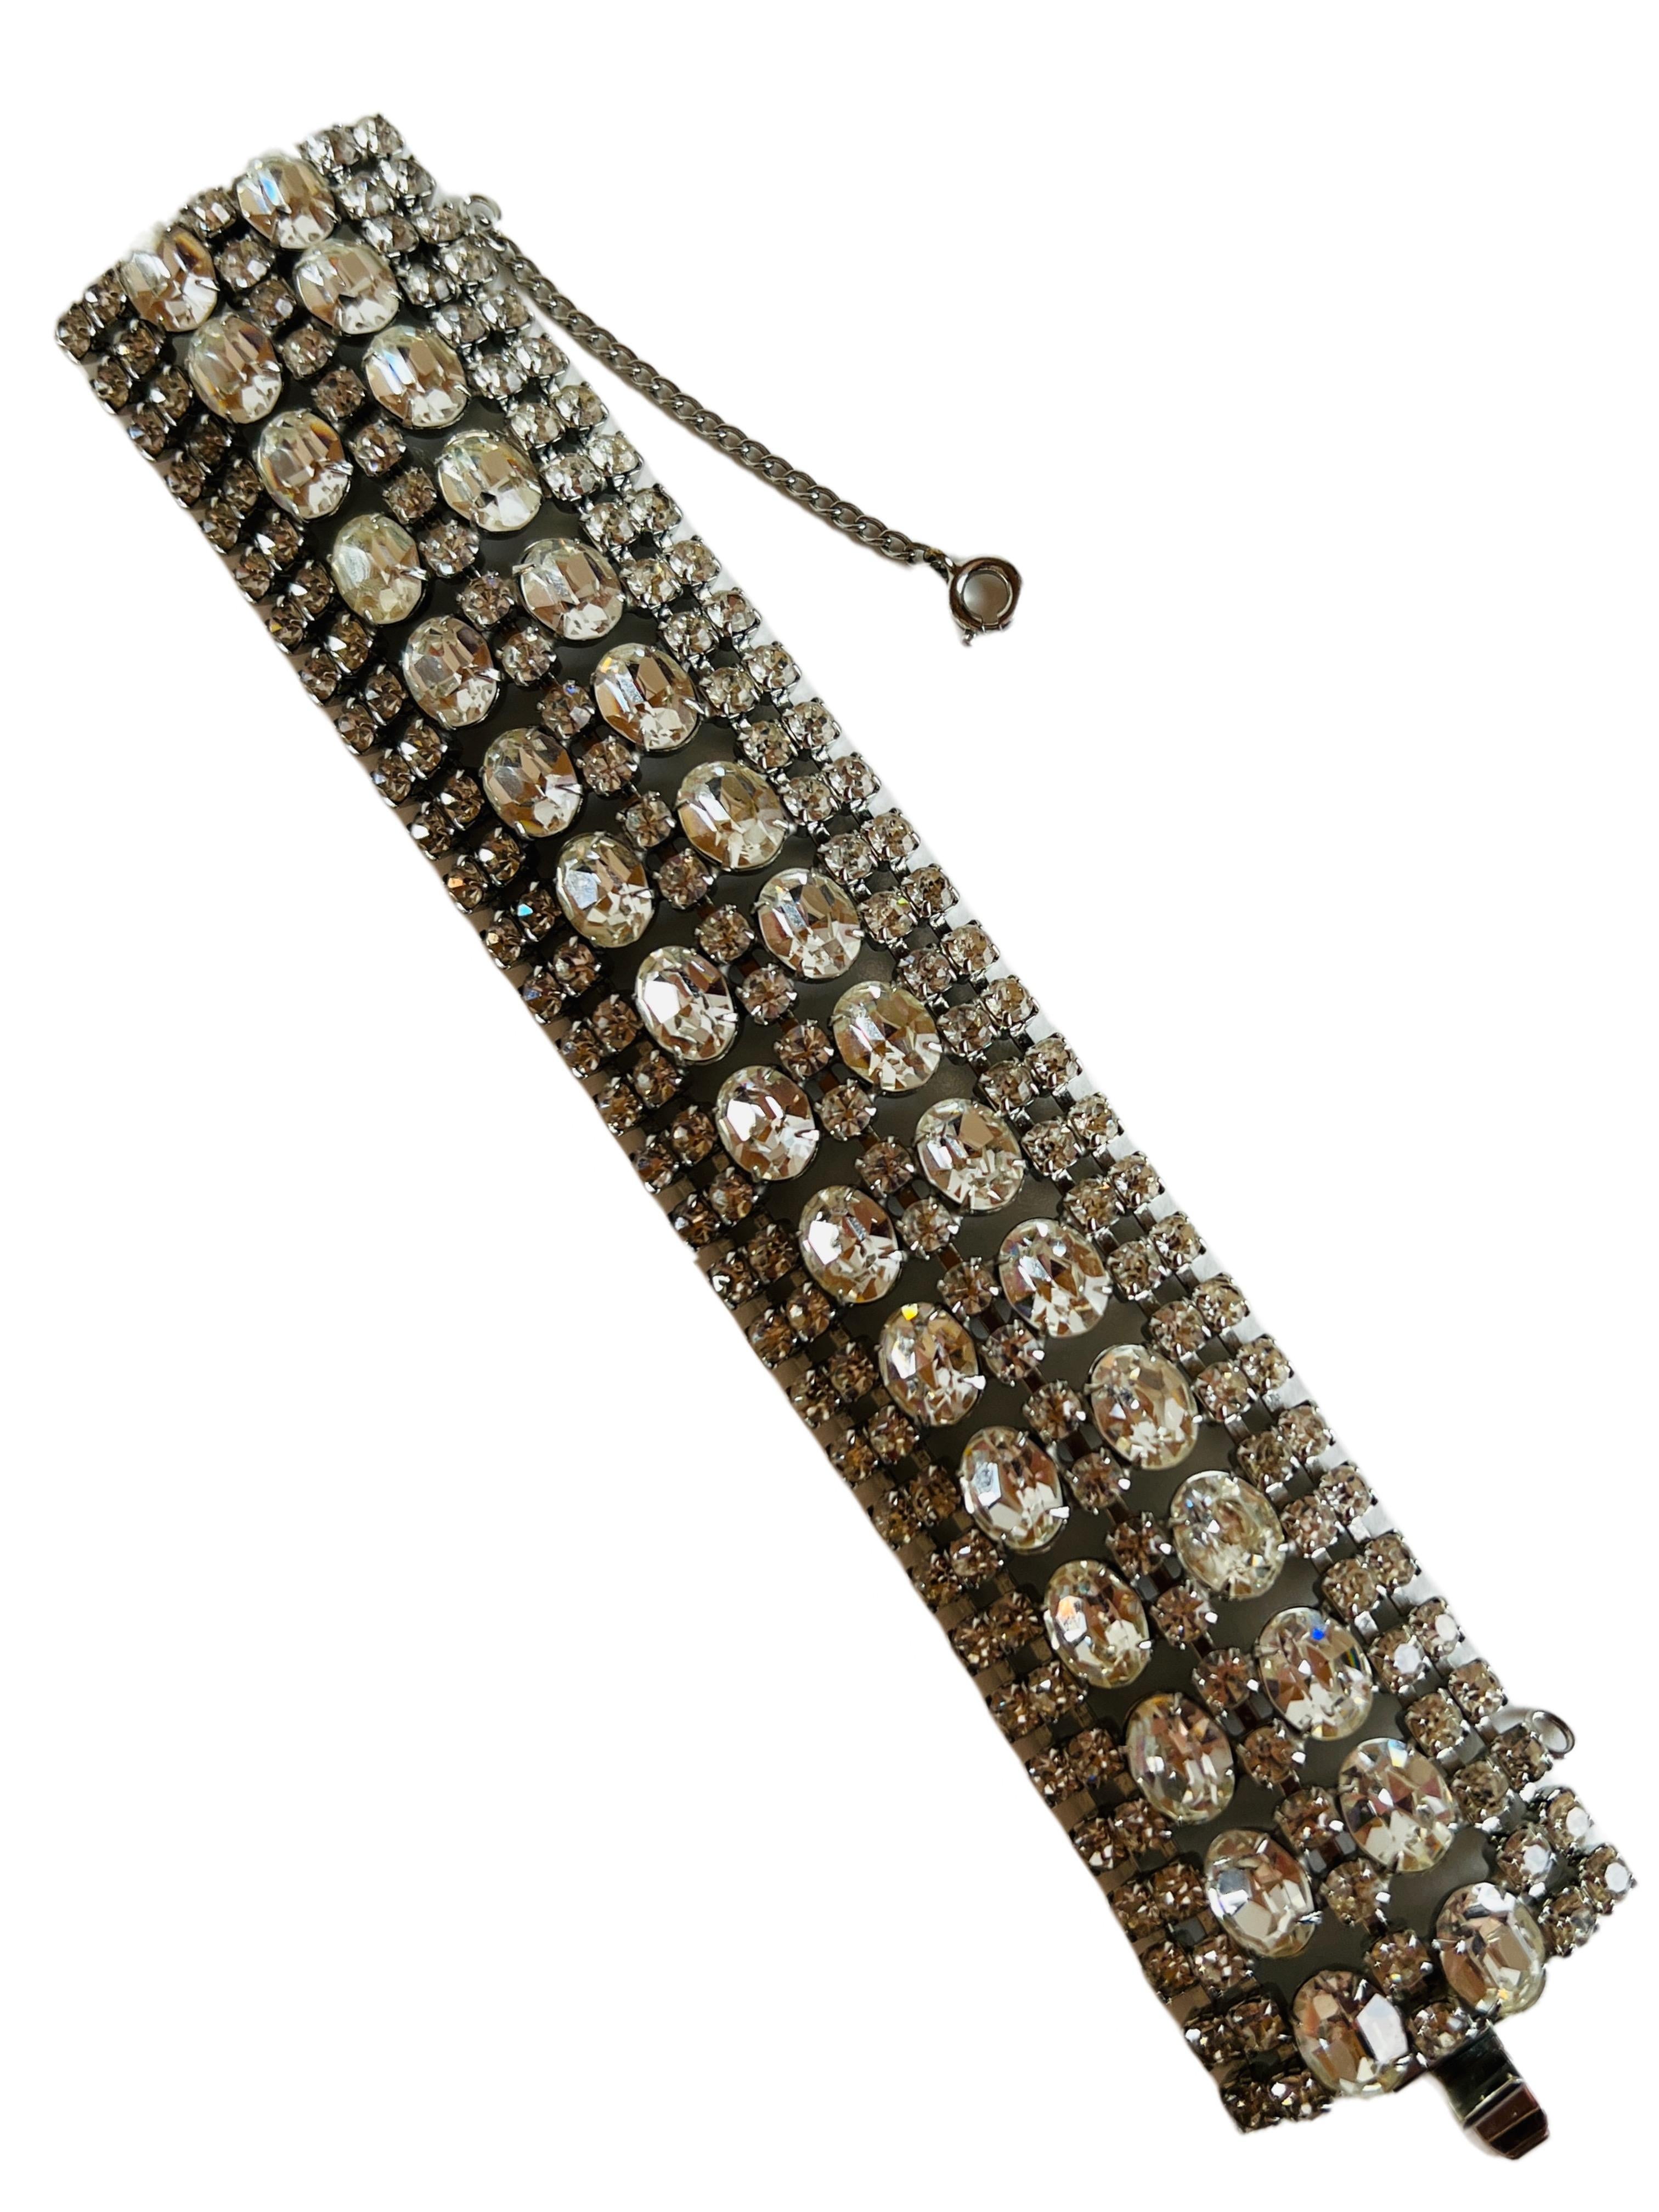 Opulent vintage bracelet, spanning seven rows wide and embellished with clear rhinestones, including both round and sizable oval cuts, all elegantly mounted in silver tone prong settings and enhanced with a safety chain for added security. Ideal for